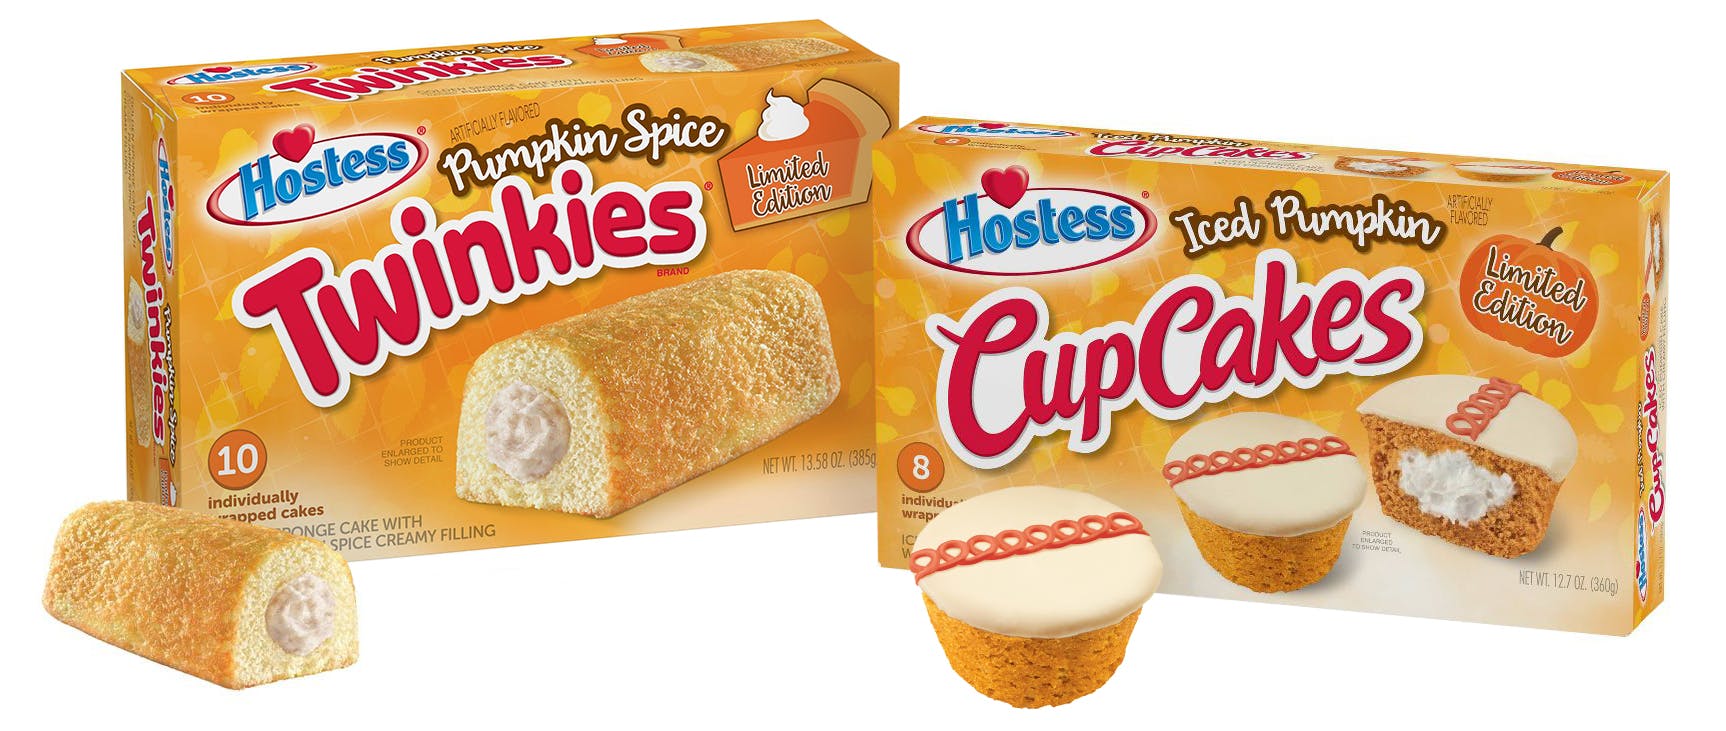 Hostess pumpkin pie spice-flavored Twinkies and Cupcakes